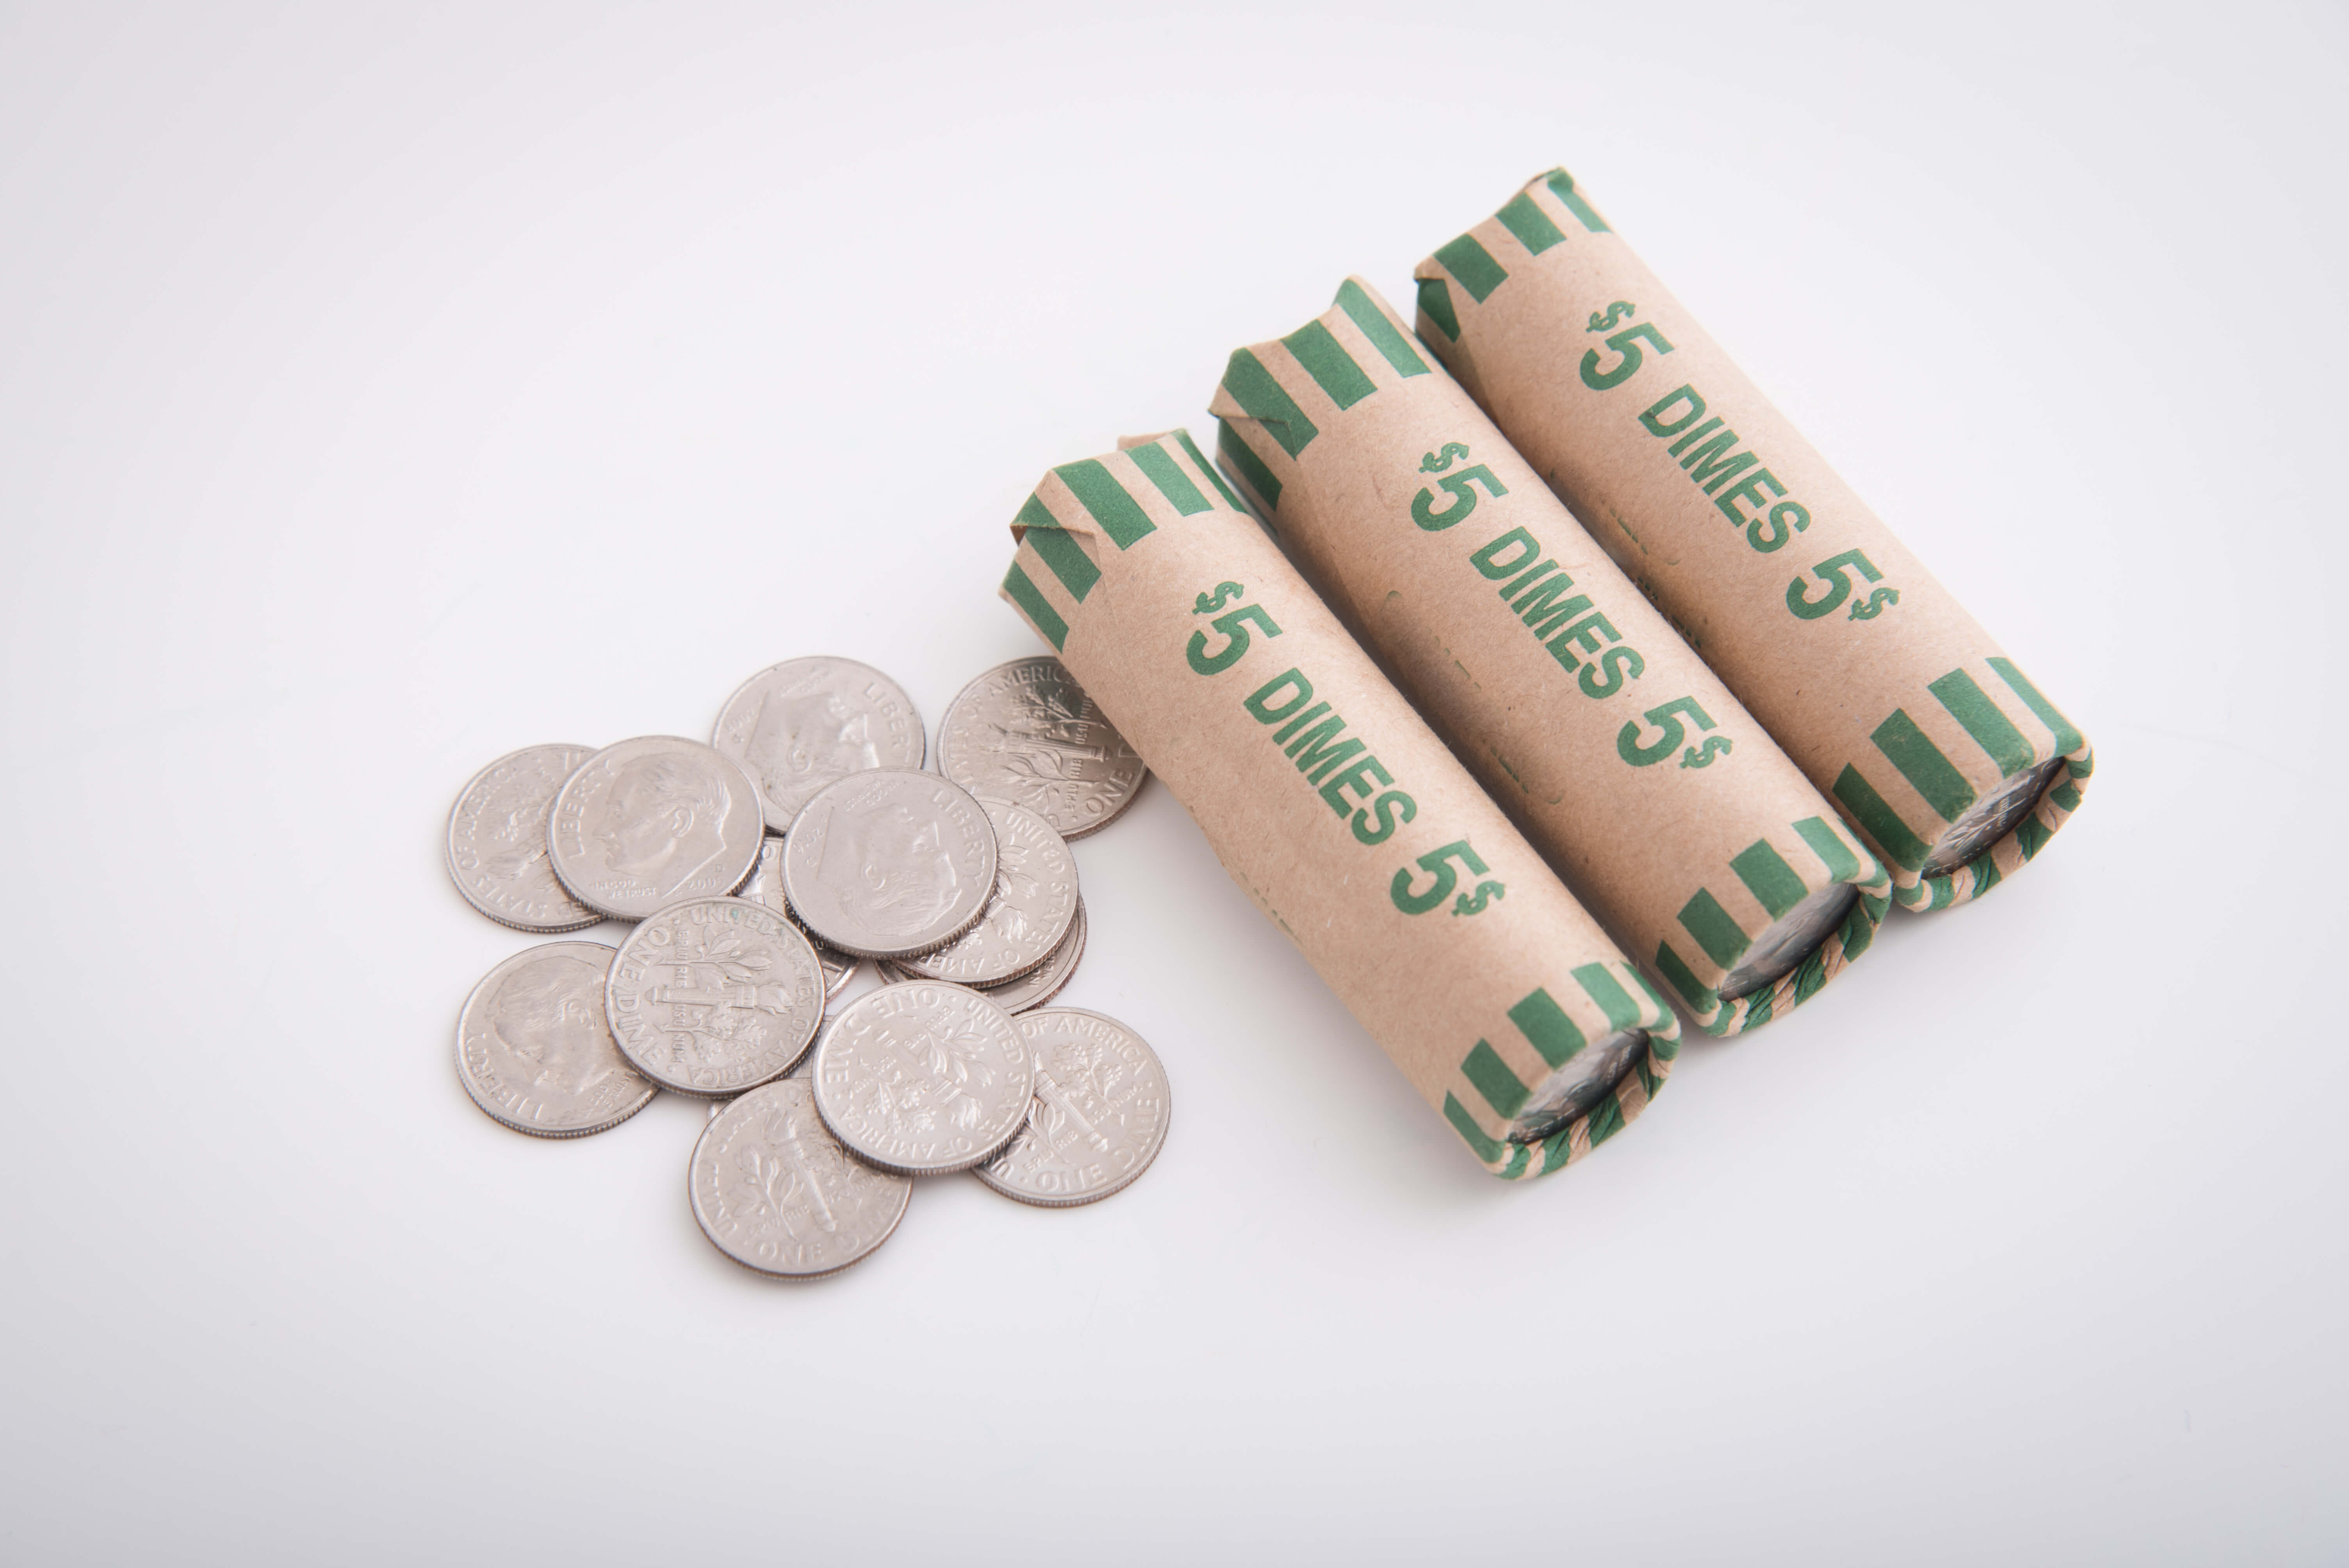 Where to Find Rolls of Coins and the Best Way to Get Them